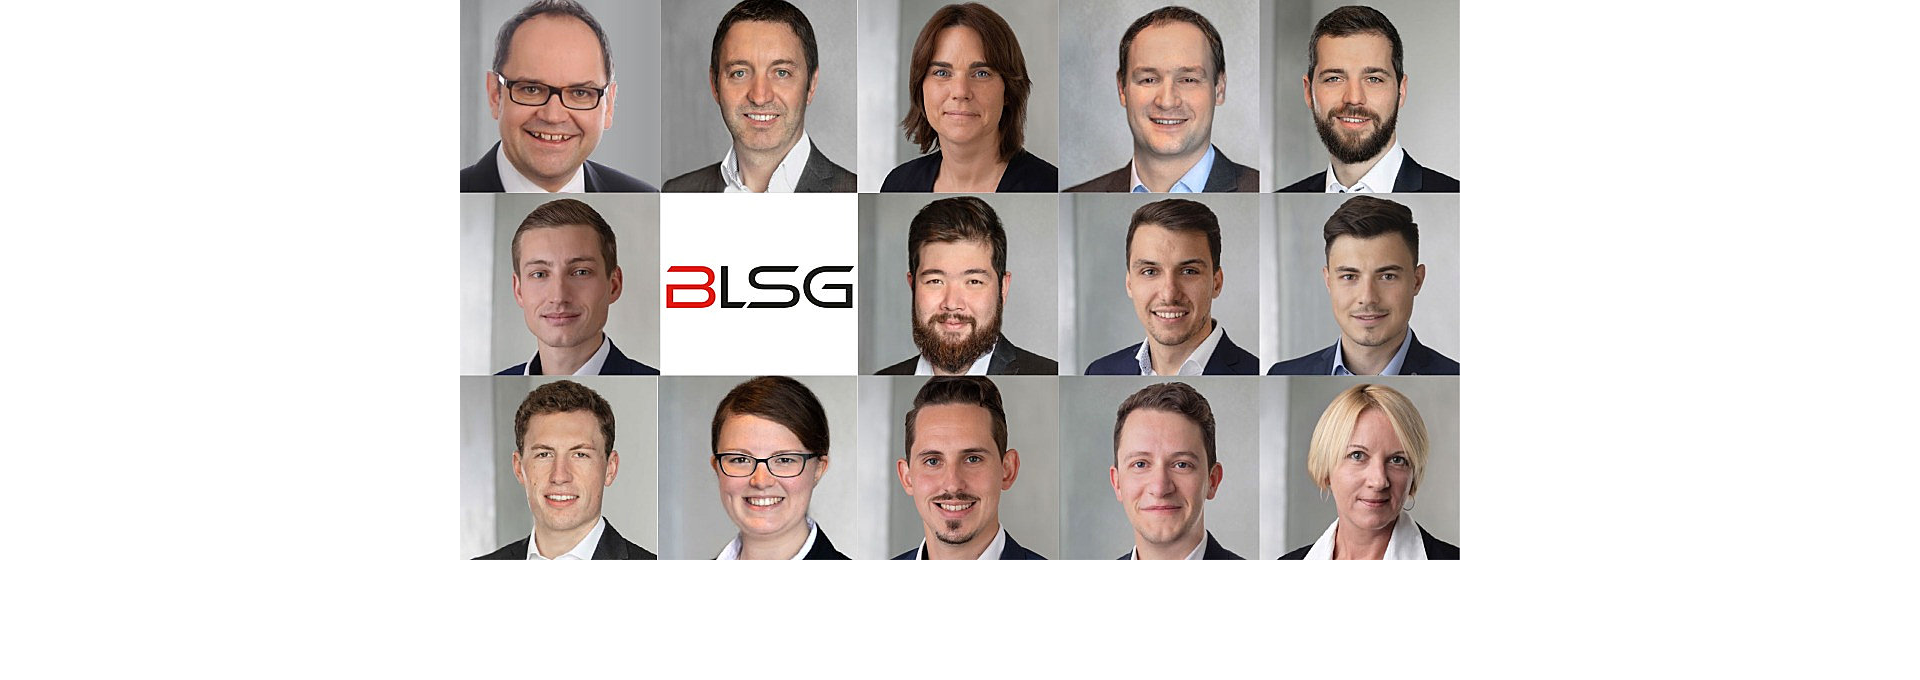 PA acquires BLSG